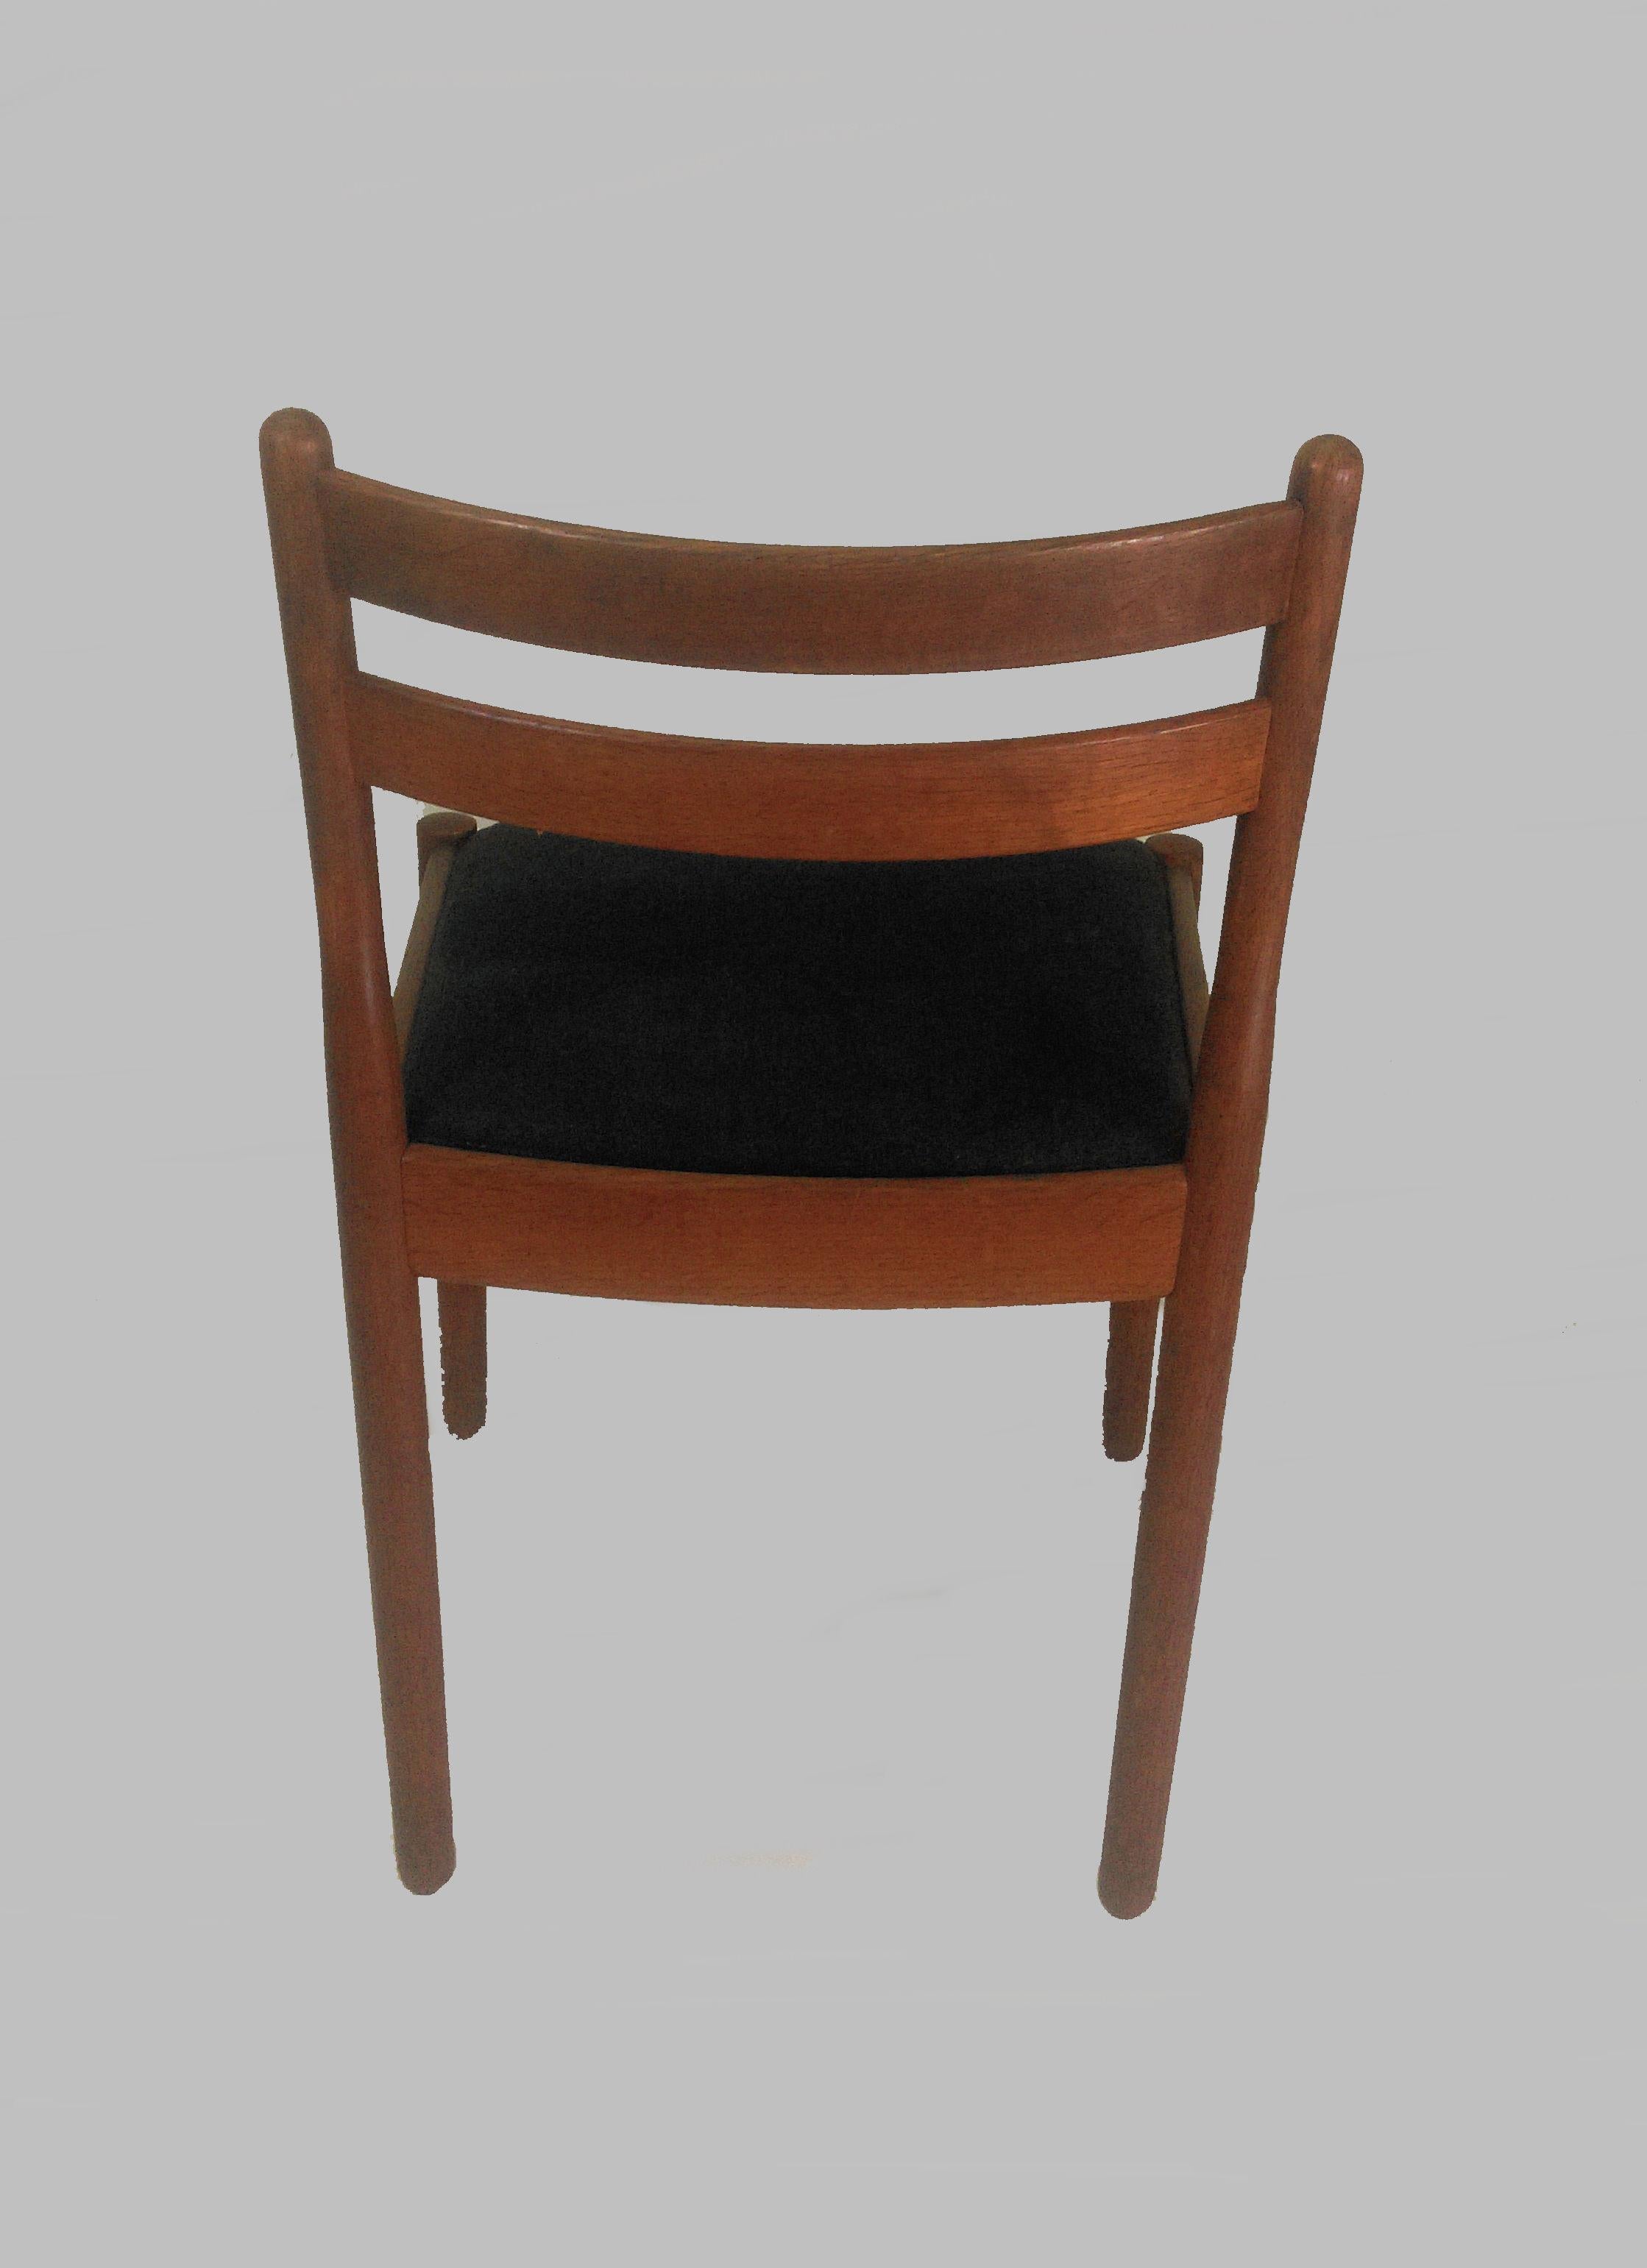 Set of Six Refinished Poul Volther Dining Chairs, Inc. Reupholstery In Good Condition For Sale In Knebel, DK